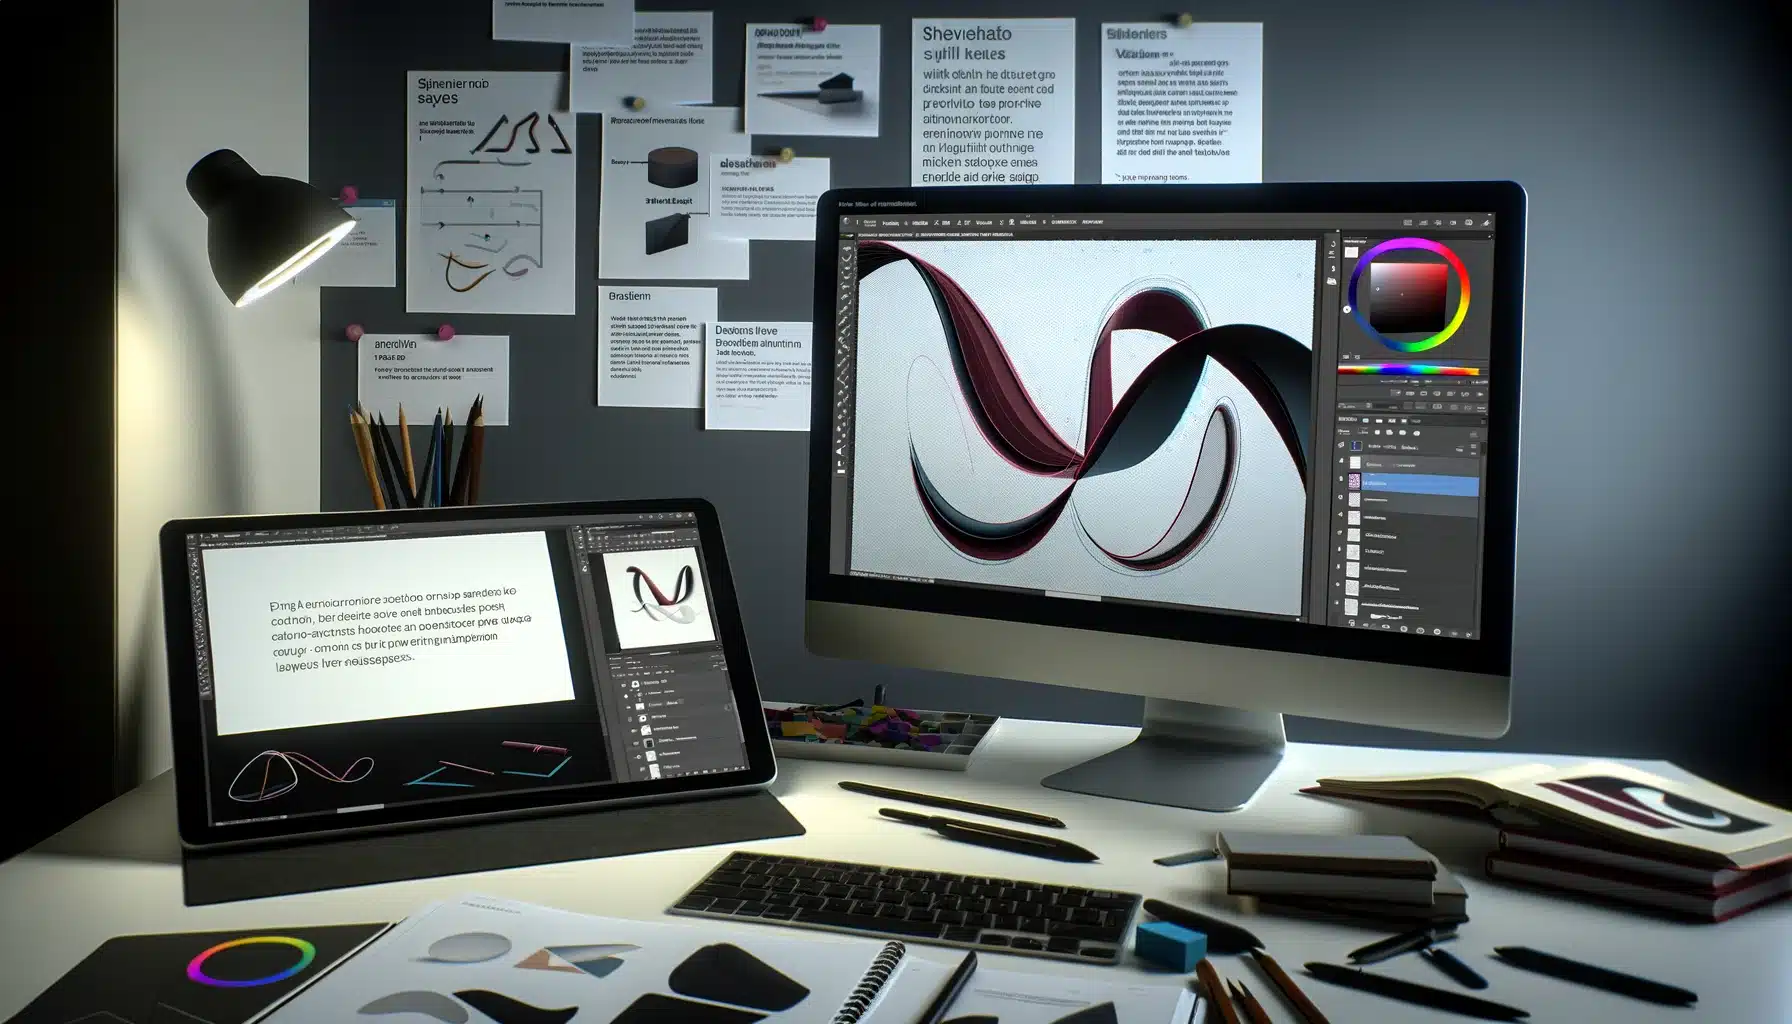 A detailed workspace exhibiting advanced layer editing and design techniques on a widescreen monitor.